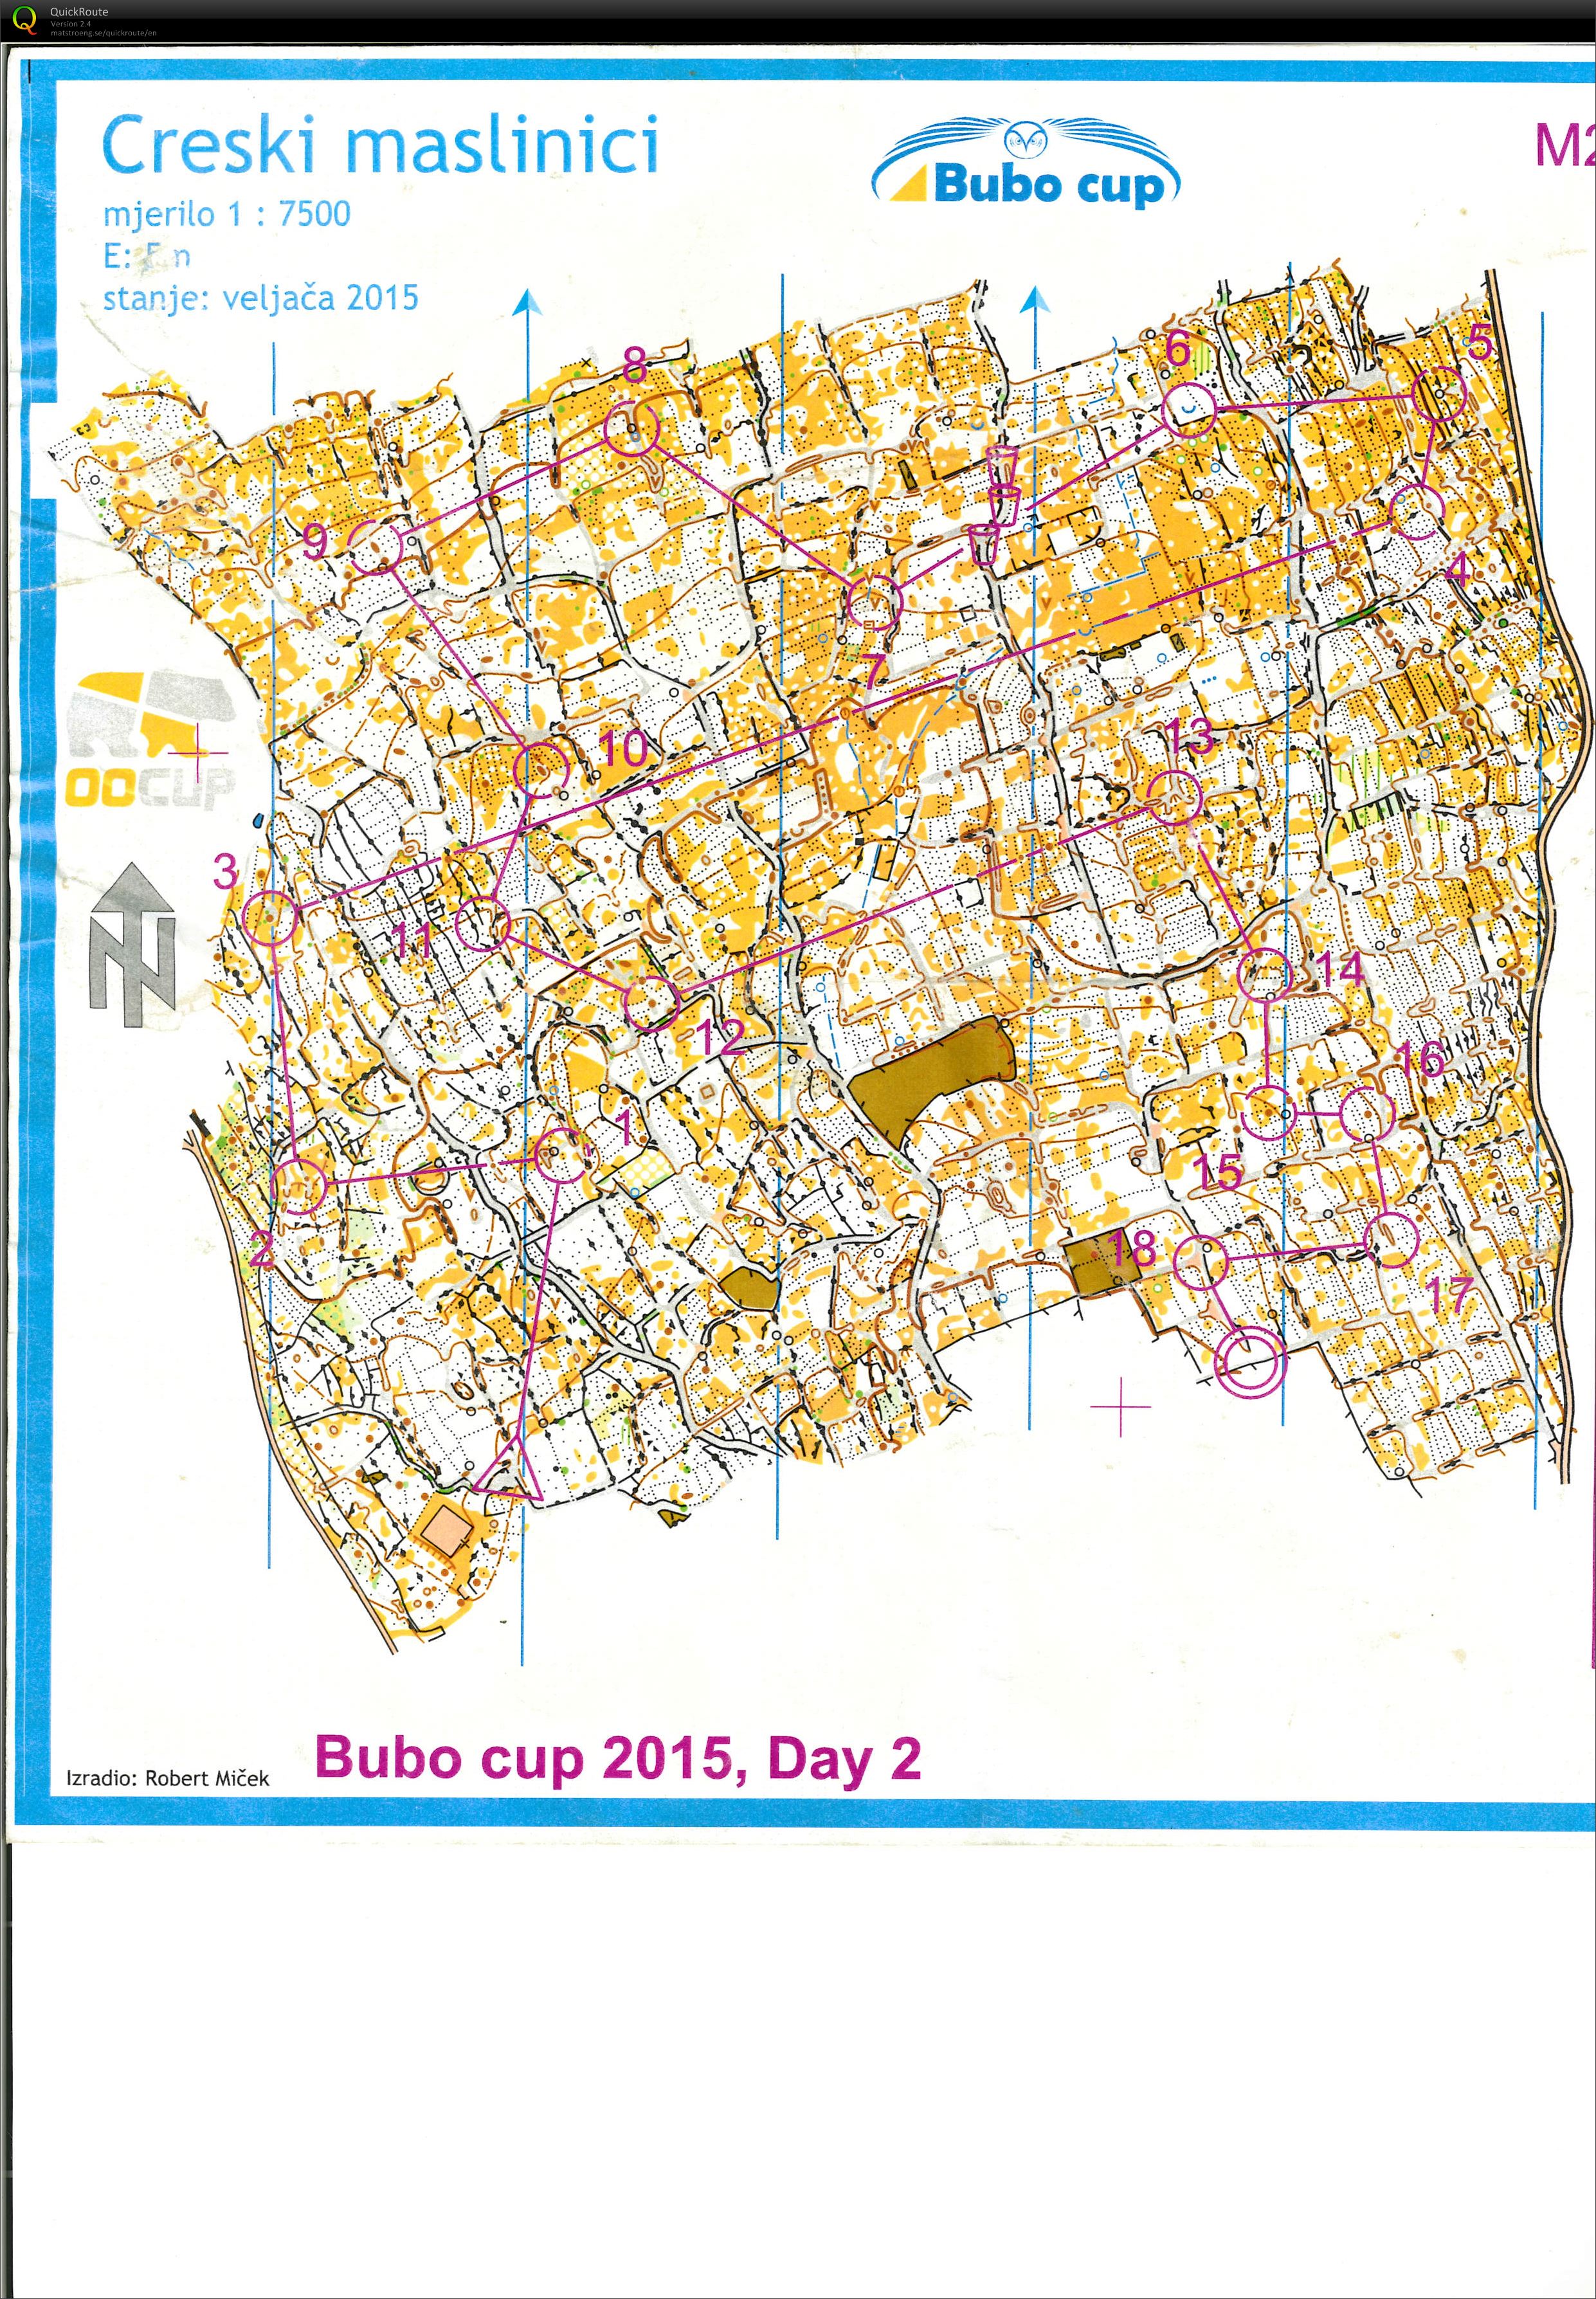 Bubocup 2015 Stage 2 (02.08.2015)